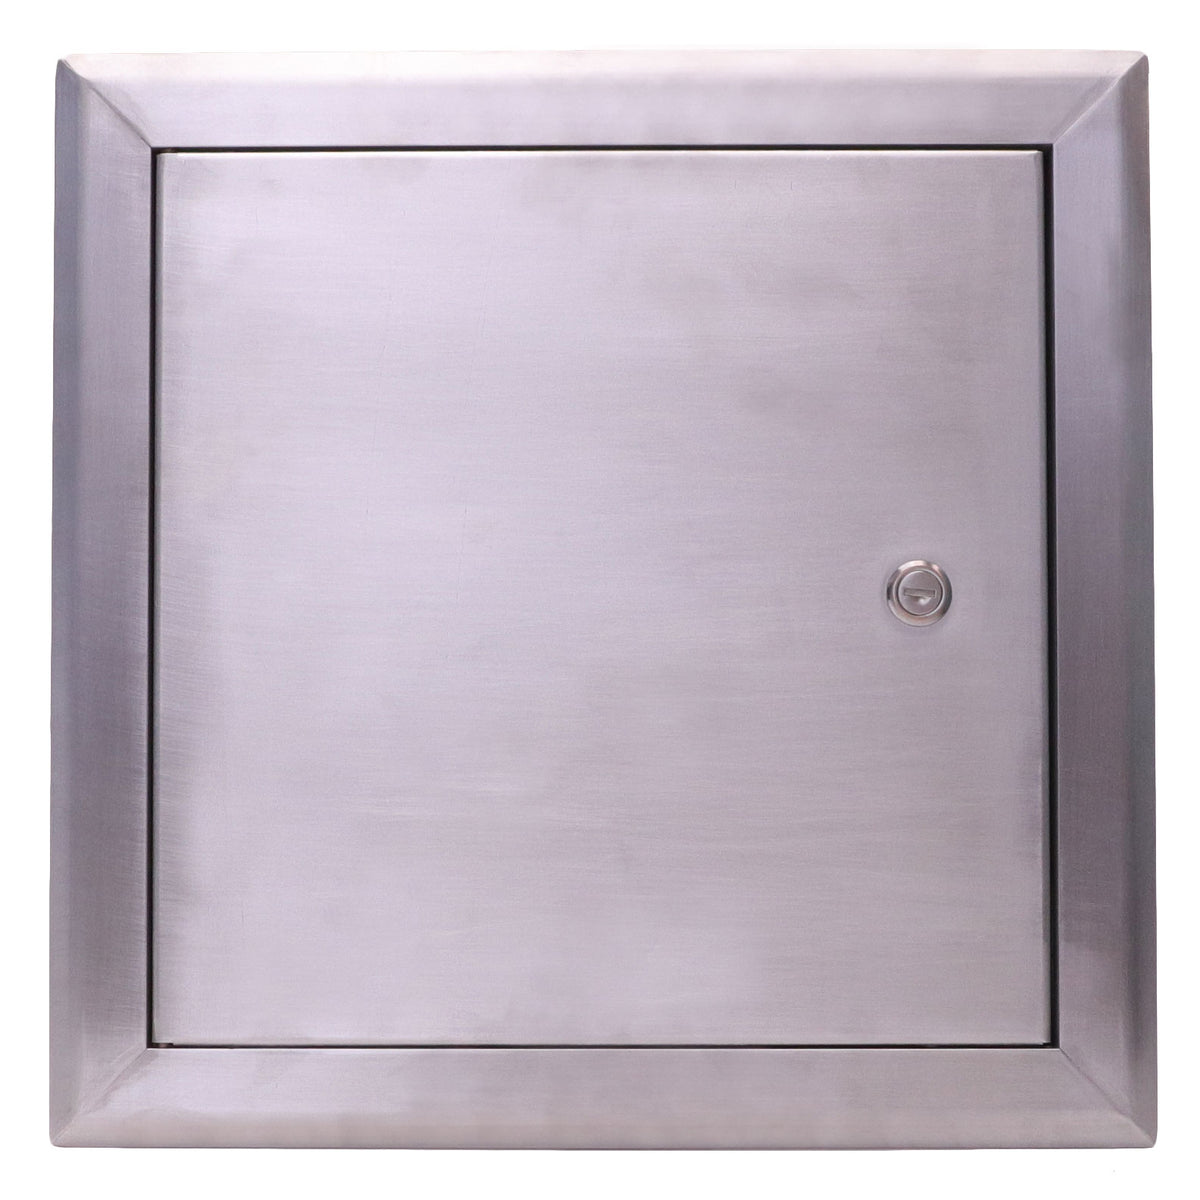 16&quot; X 16&quot; Aluminum Color Insulated Fire Rated Access Panel Door For Wall / Ceiling Application (Lock and Key) With Frame - [Outer Dimensions: 17&quot; Width X 17&quot; Height]